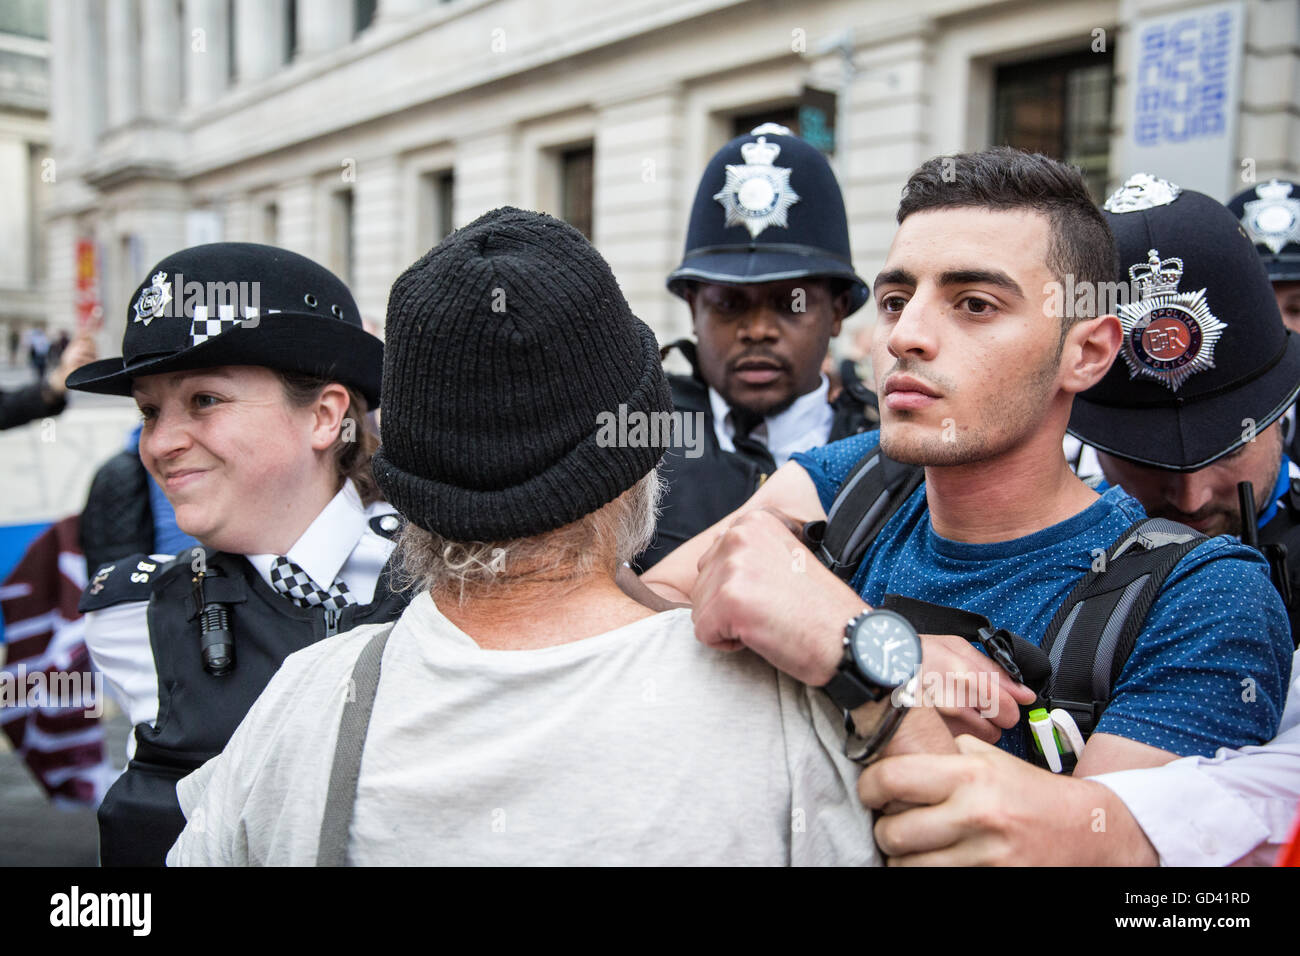 London, UK. 11th July, 2016. Bahraini human rights campaigner Isa Alaali is arrested while protesting outside an official reception for the Farnborough International arms fair attended by arms dealers at the Science Museum. Some arms dealers attending the reception are believed to have been turned away as a result of the protest organised by the Campaign Against Arms Trade. Protesters were objecting in particular to arms sales to Saudi Arabia, used in human rights abuses against the Yemeni people. Credit:  Mark Kerrison/Alamy Live News Stock Photo